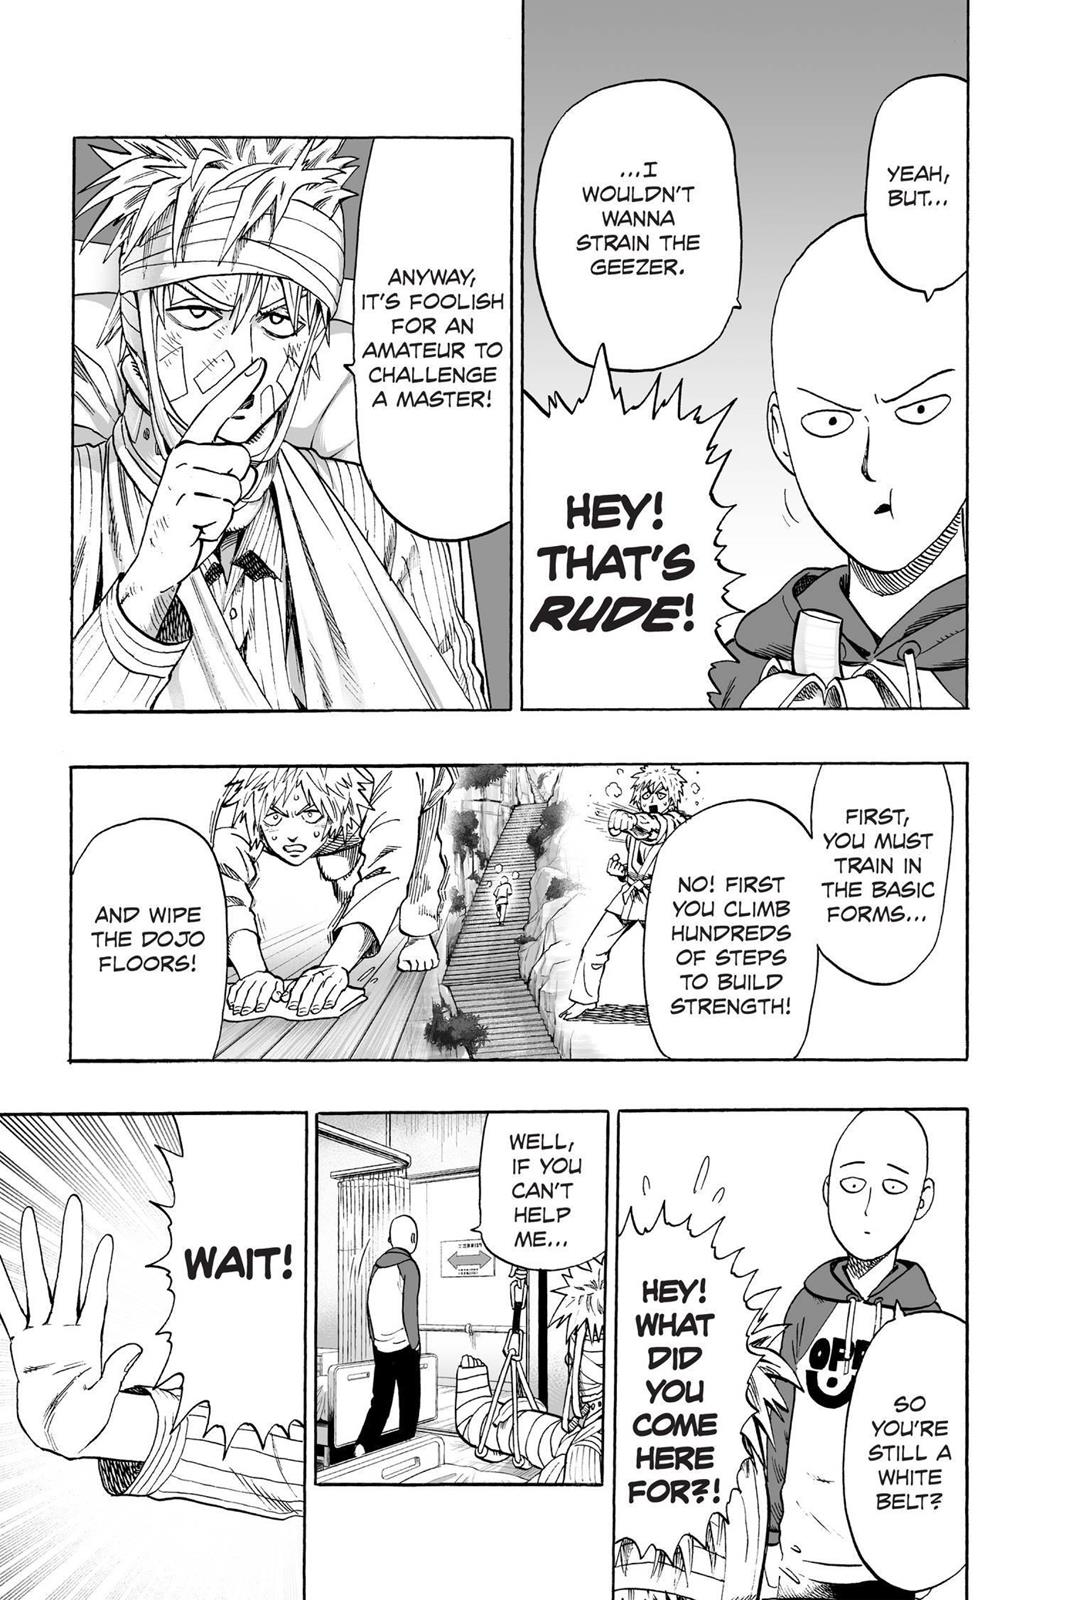 One-Punch Man, Punch 49 image 10